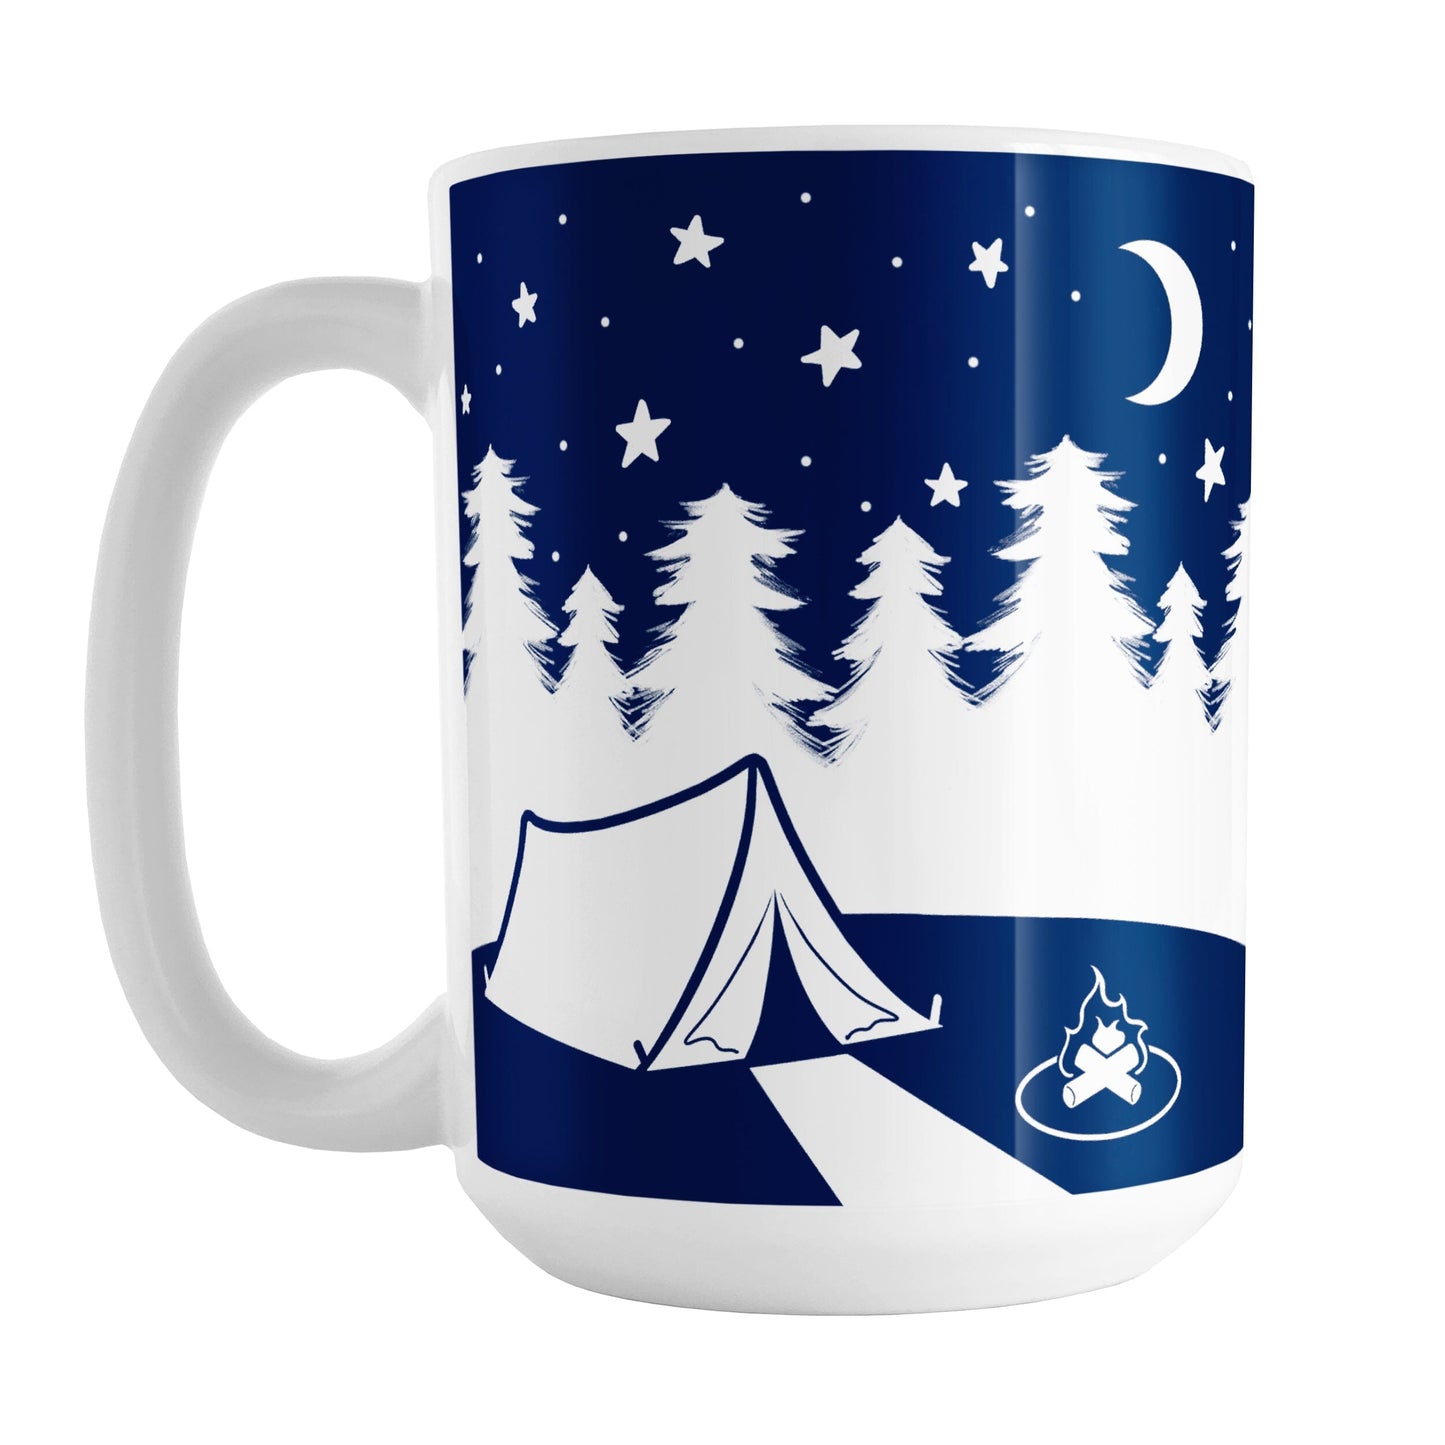 Night Sky Camping Mug (15oz) at Amy's Coffee Mugs. A ceramic coffee mug designed with a blue and white illustration of a camping tent on a hill with a campfire, white trees behind the hill, and a sky filled with whimsical hand-drawn stars and a moon.